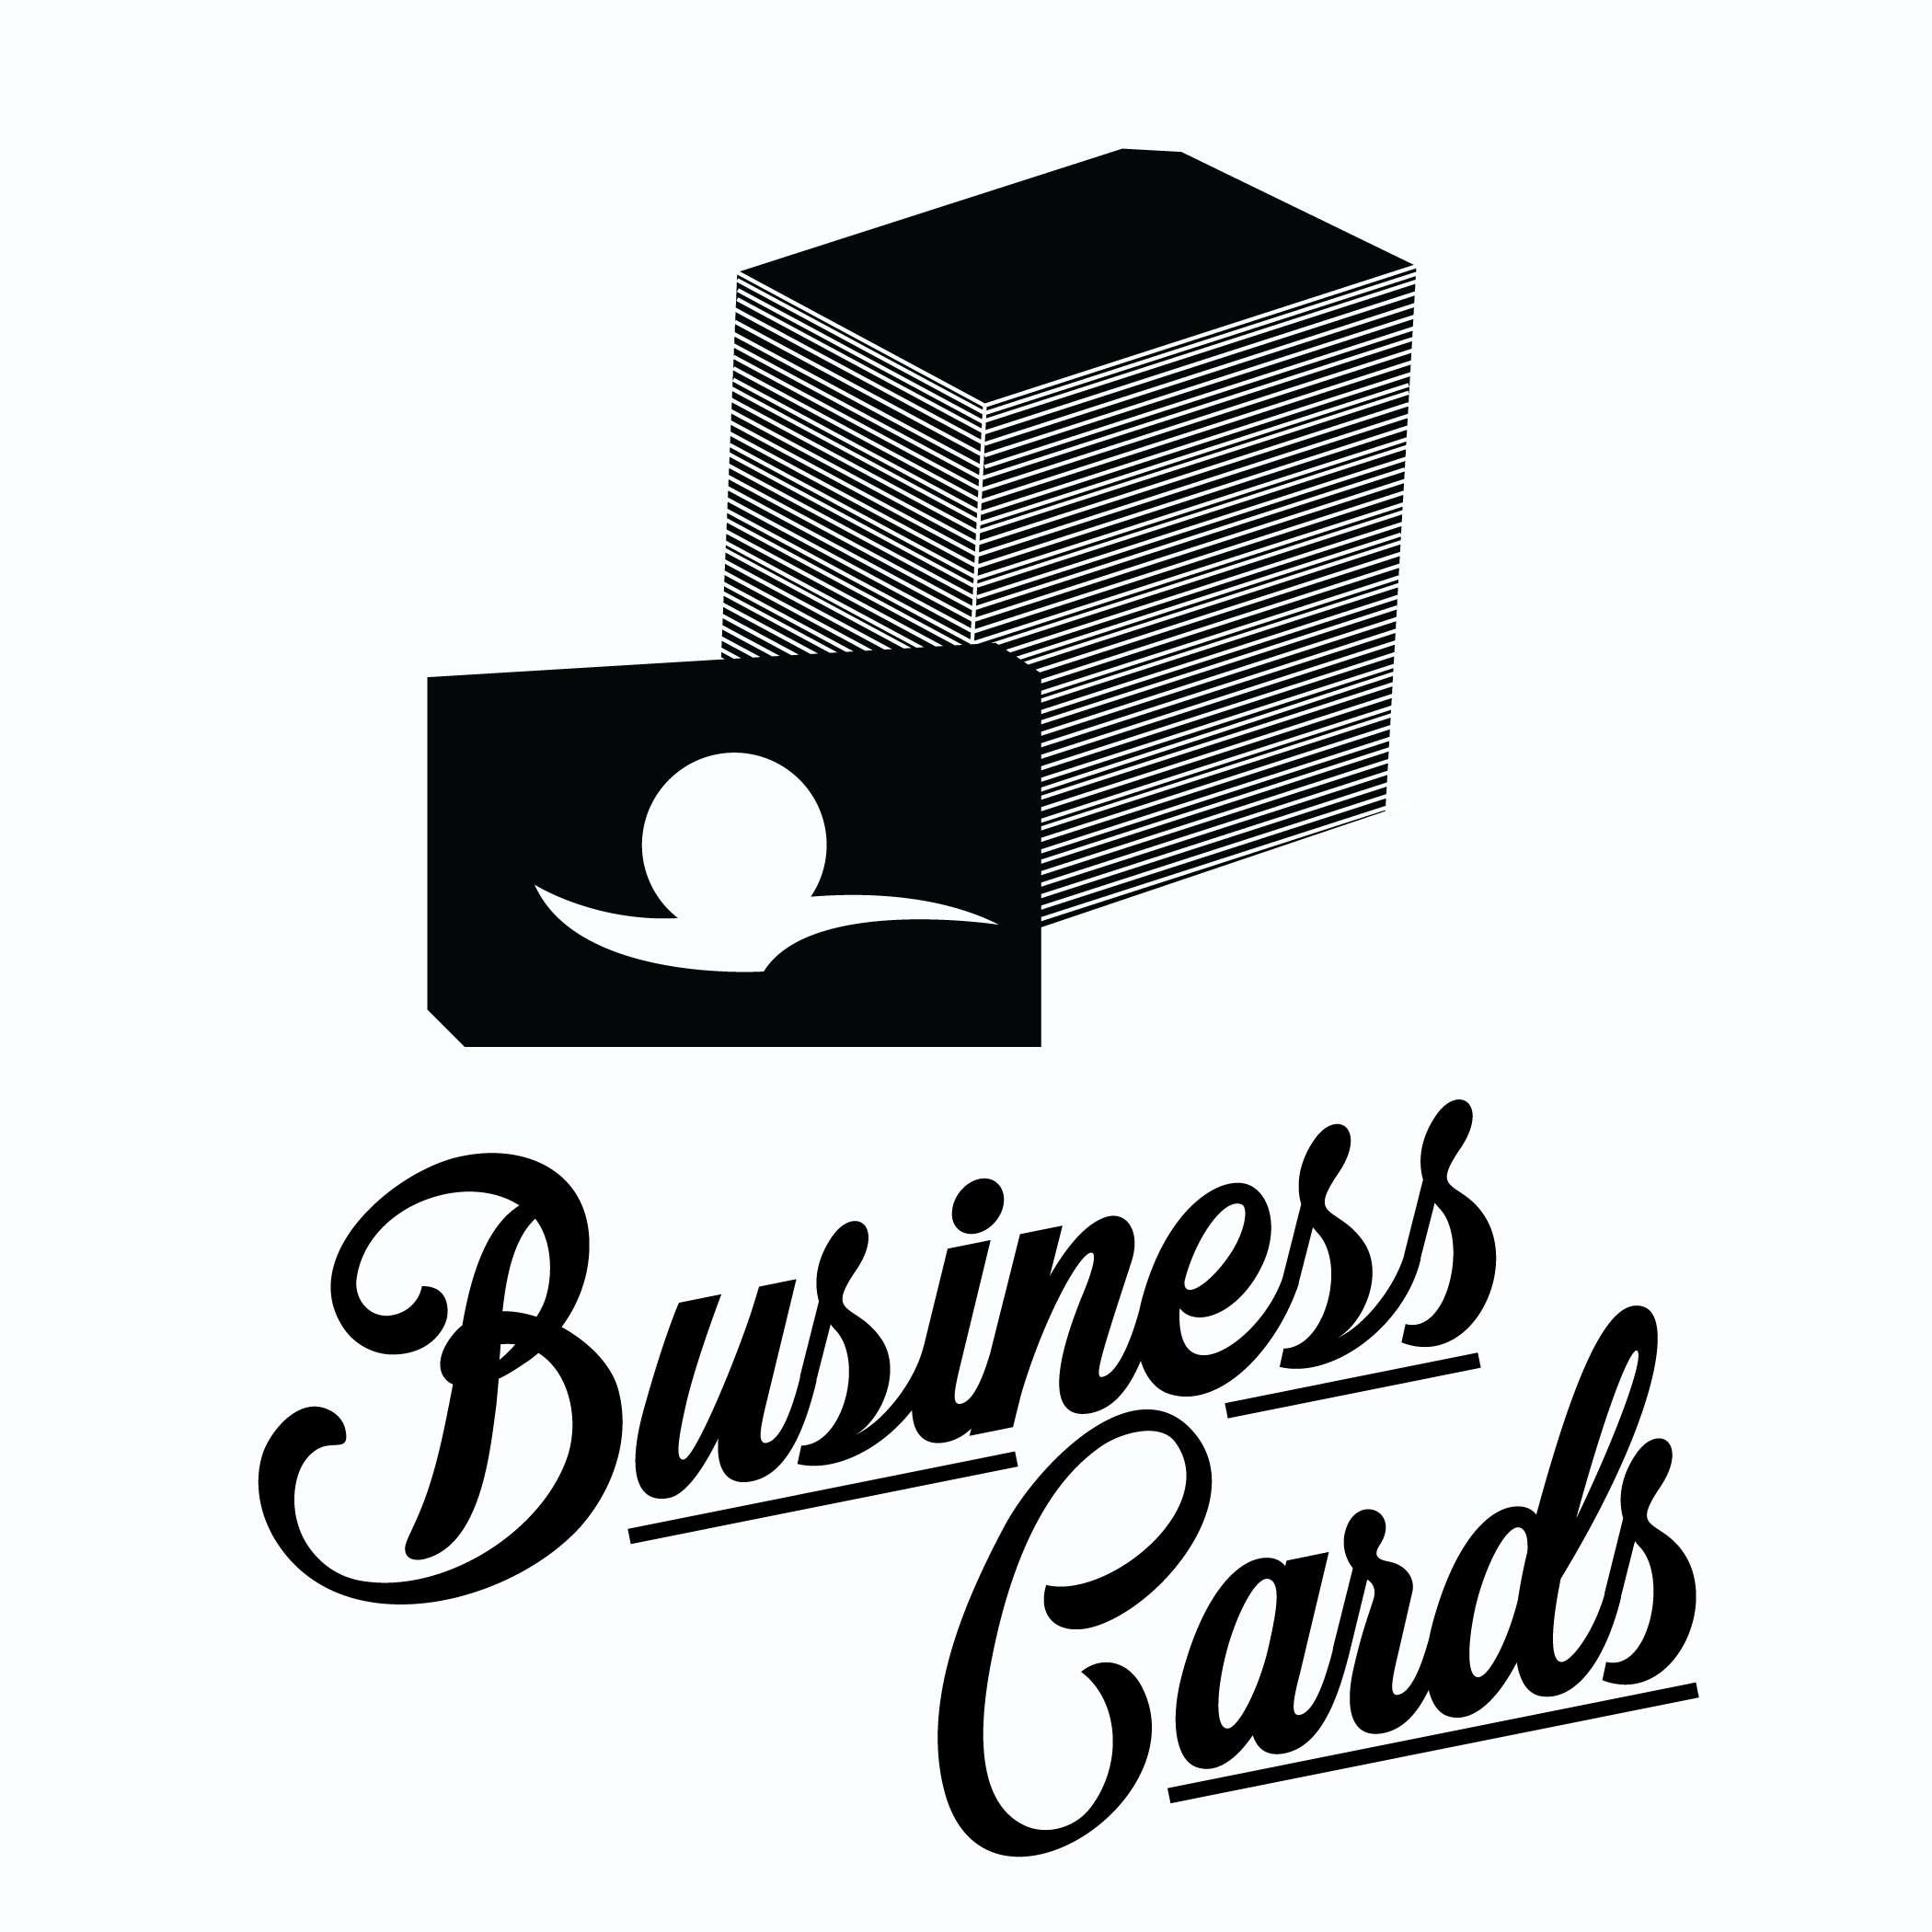 A stack of business cards to offer business card services.